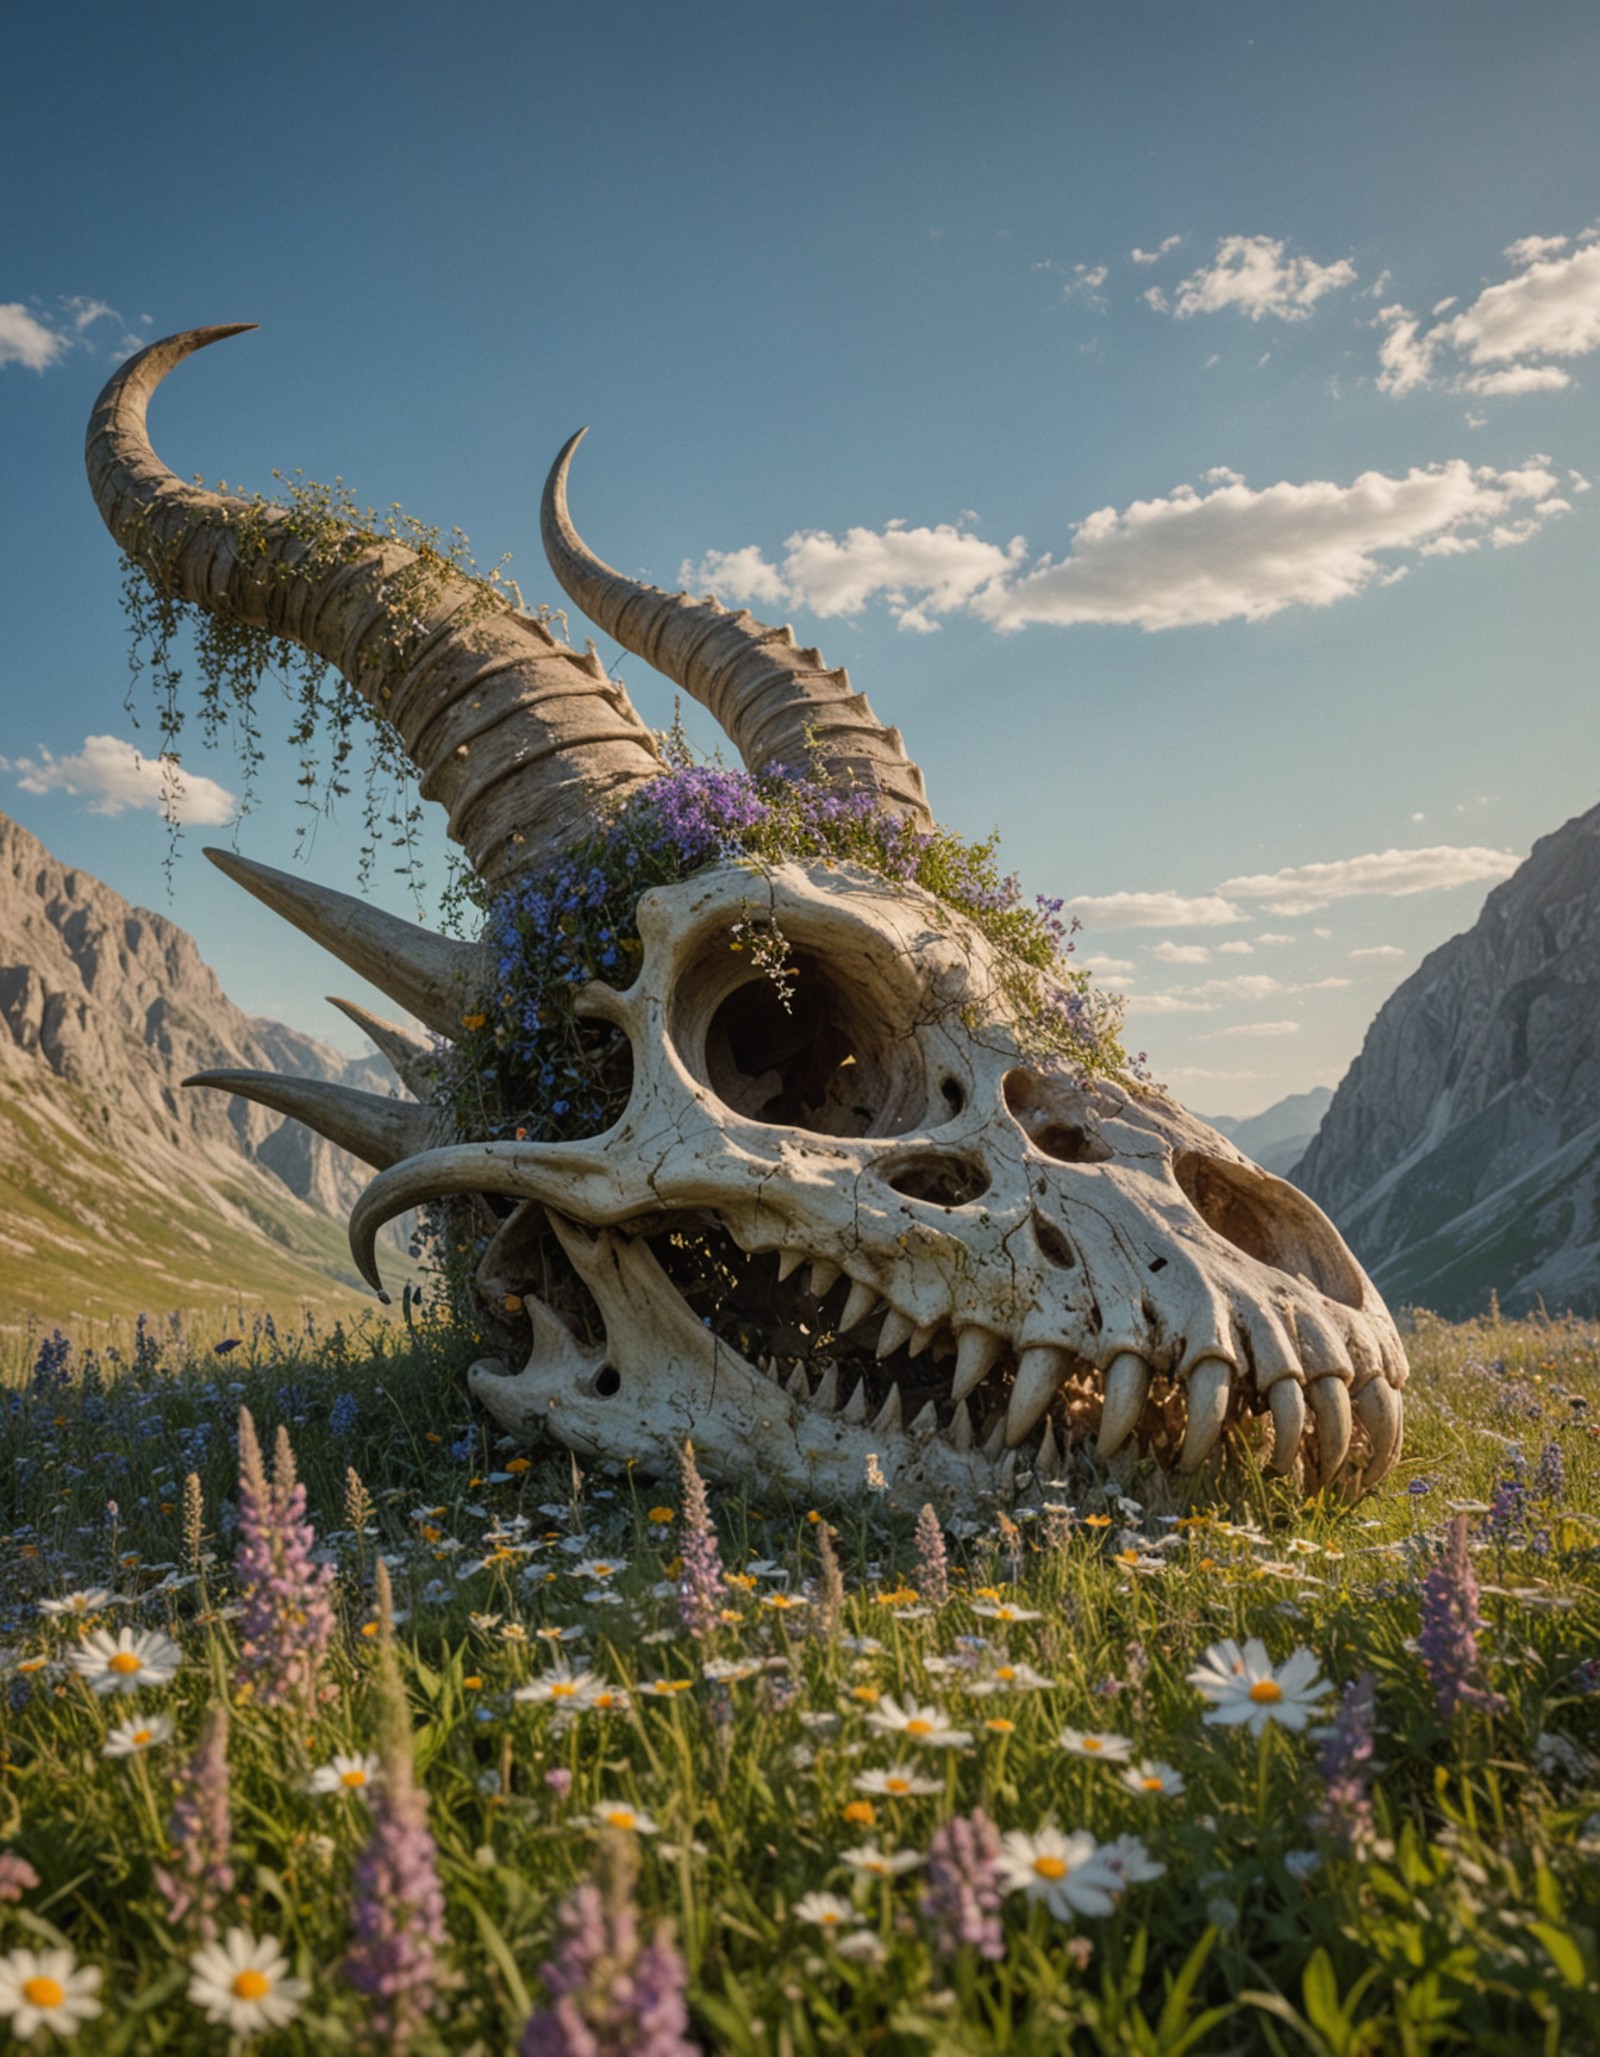 In a serene sunlit meadow filled with vibrant wildflowers, a massive dragon skull lies partially buried, the skull's formi...